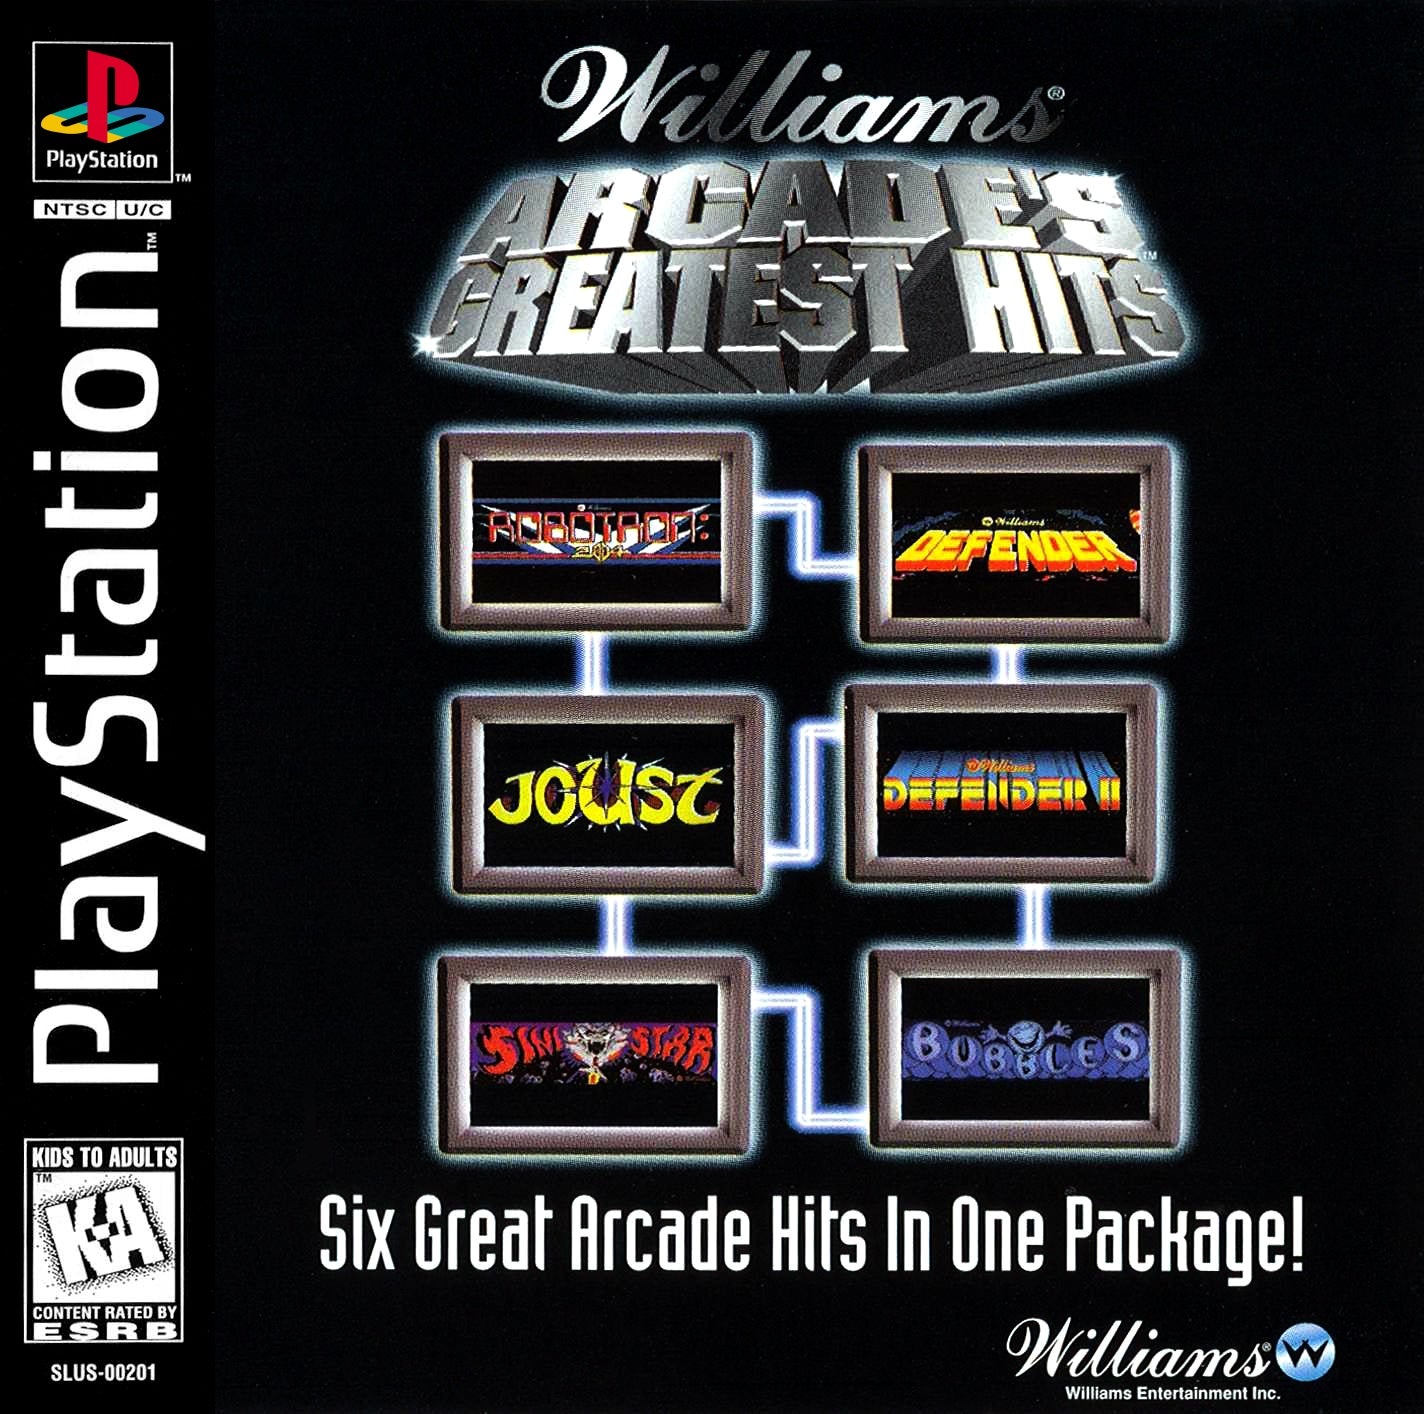 Williams Arcade's Greatest Hits - PS1 (Pre-owned)